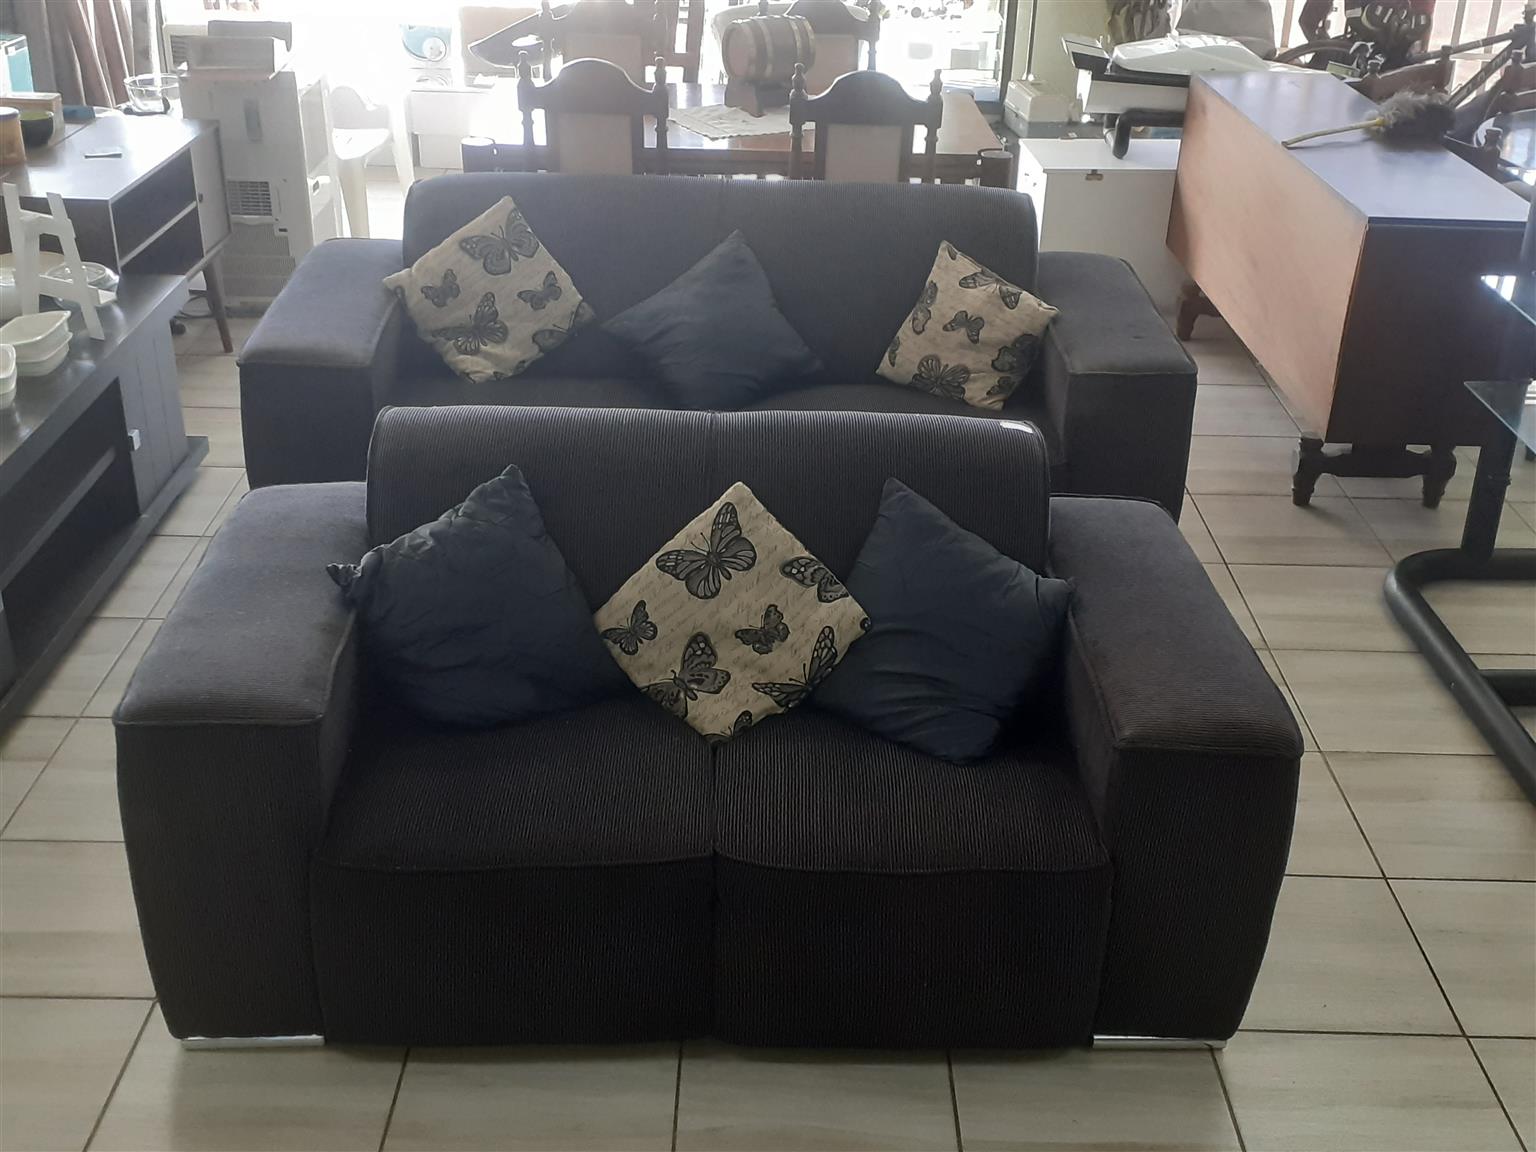 Couches 2 SEATER BY 2 SEATER (S110968A)